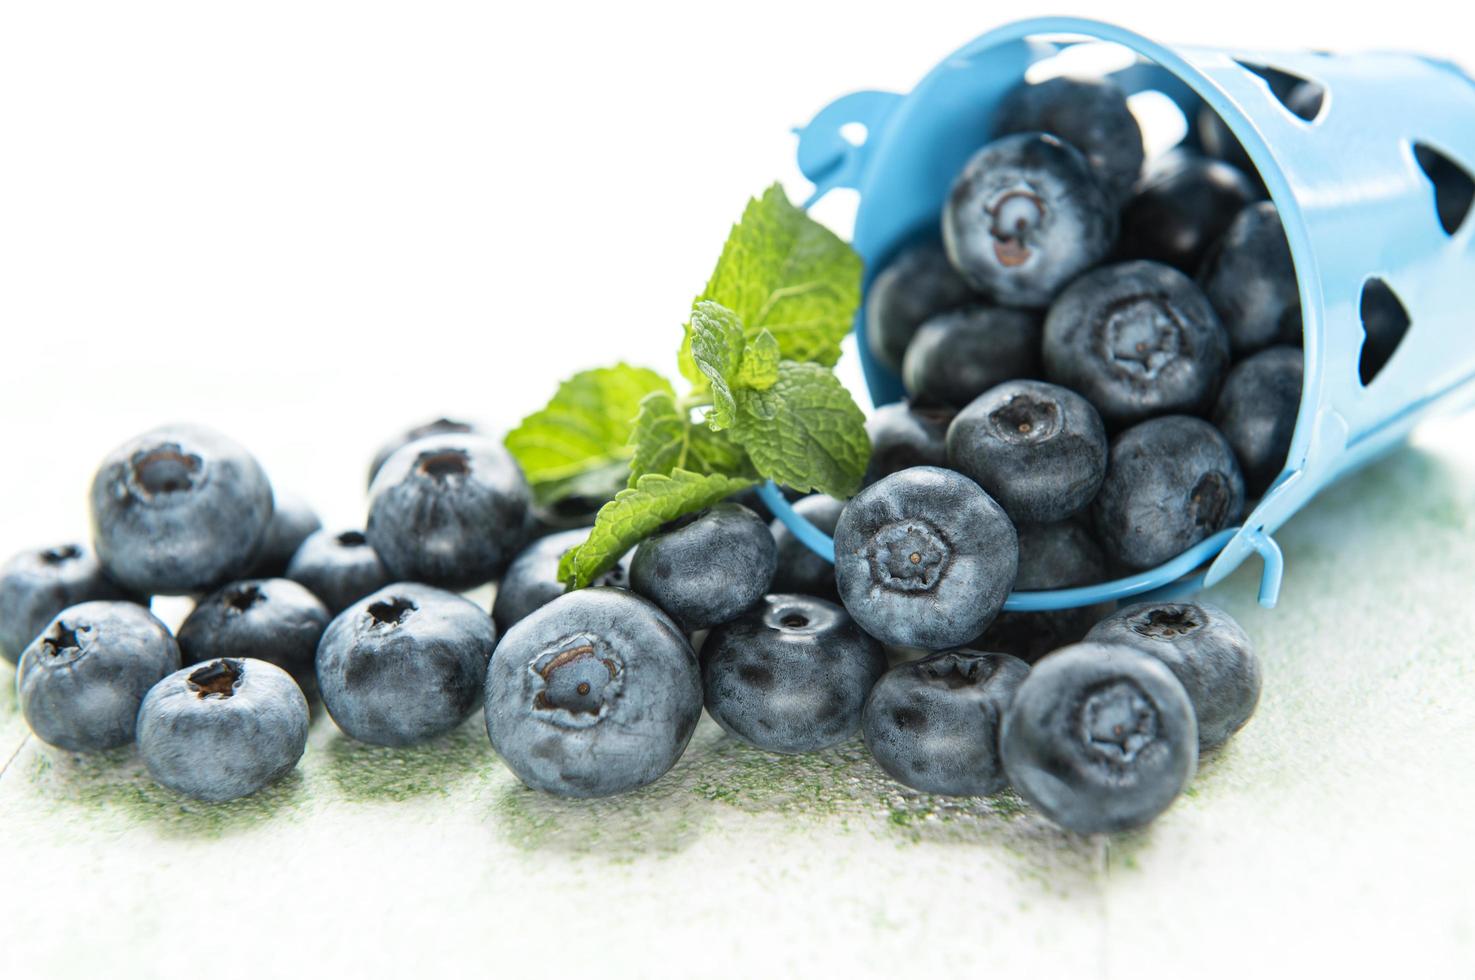 Blueberries on wooden background photo